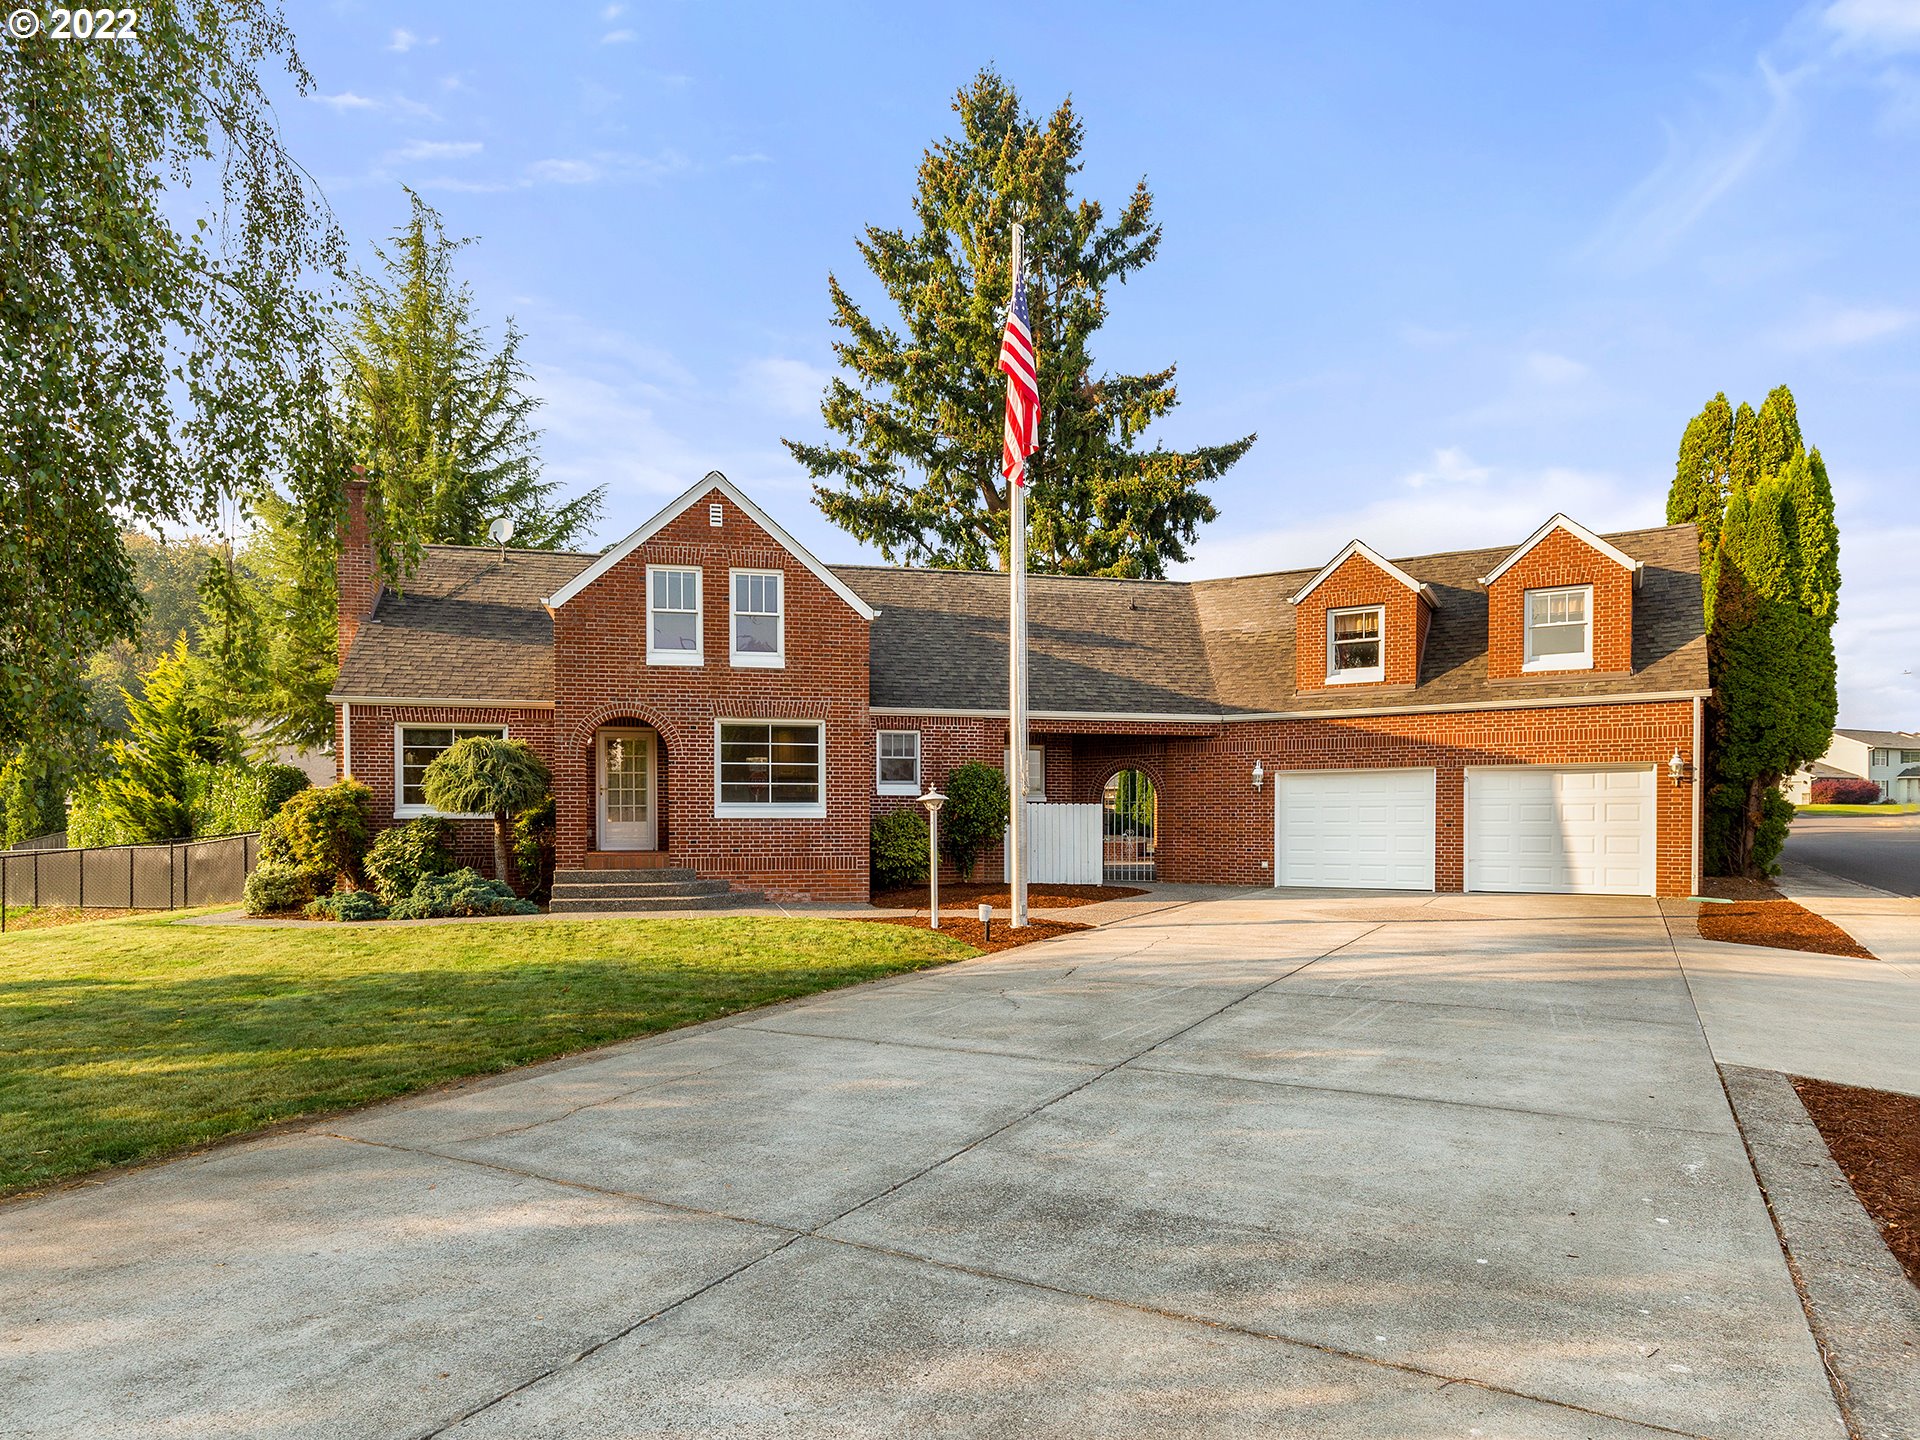 2604 NW Bliss Rd, Vancouver, WA 98685